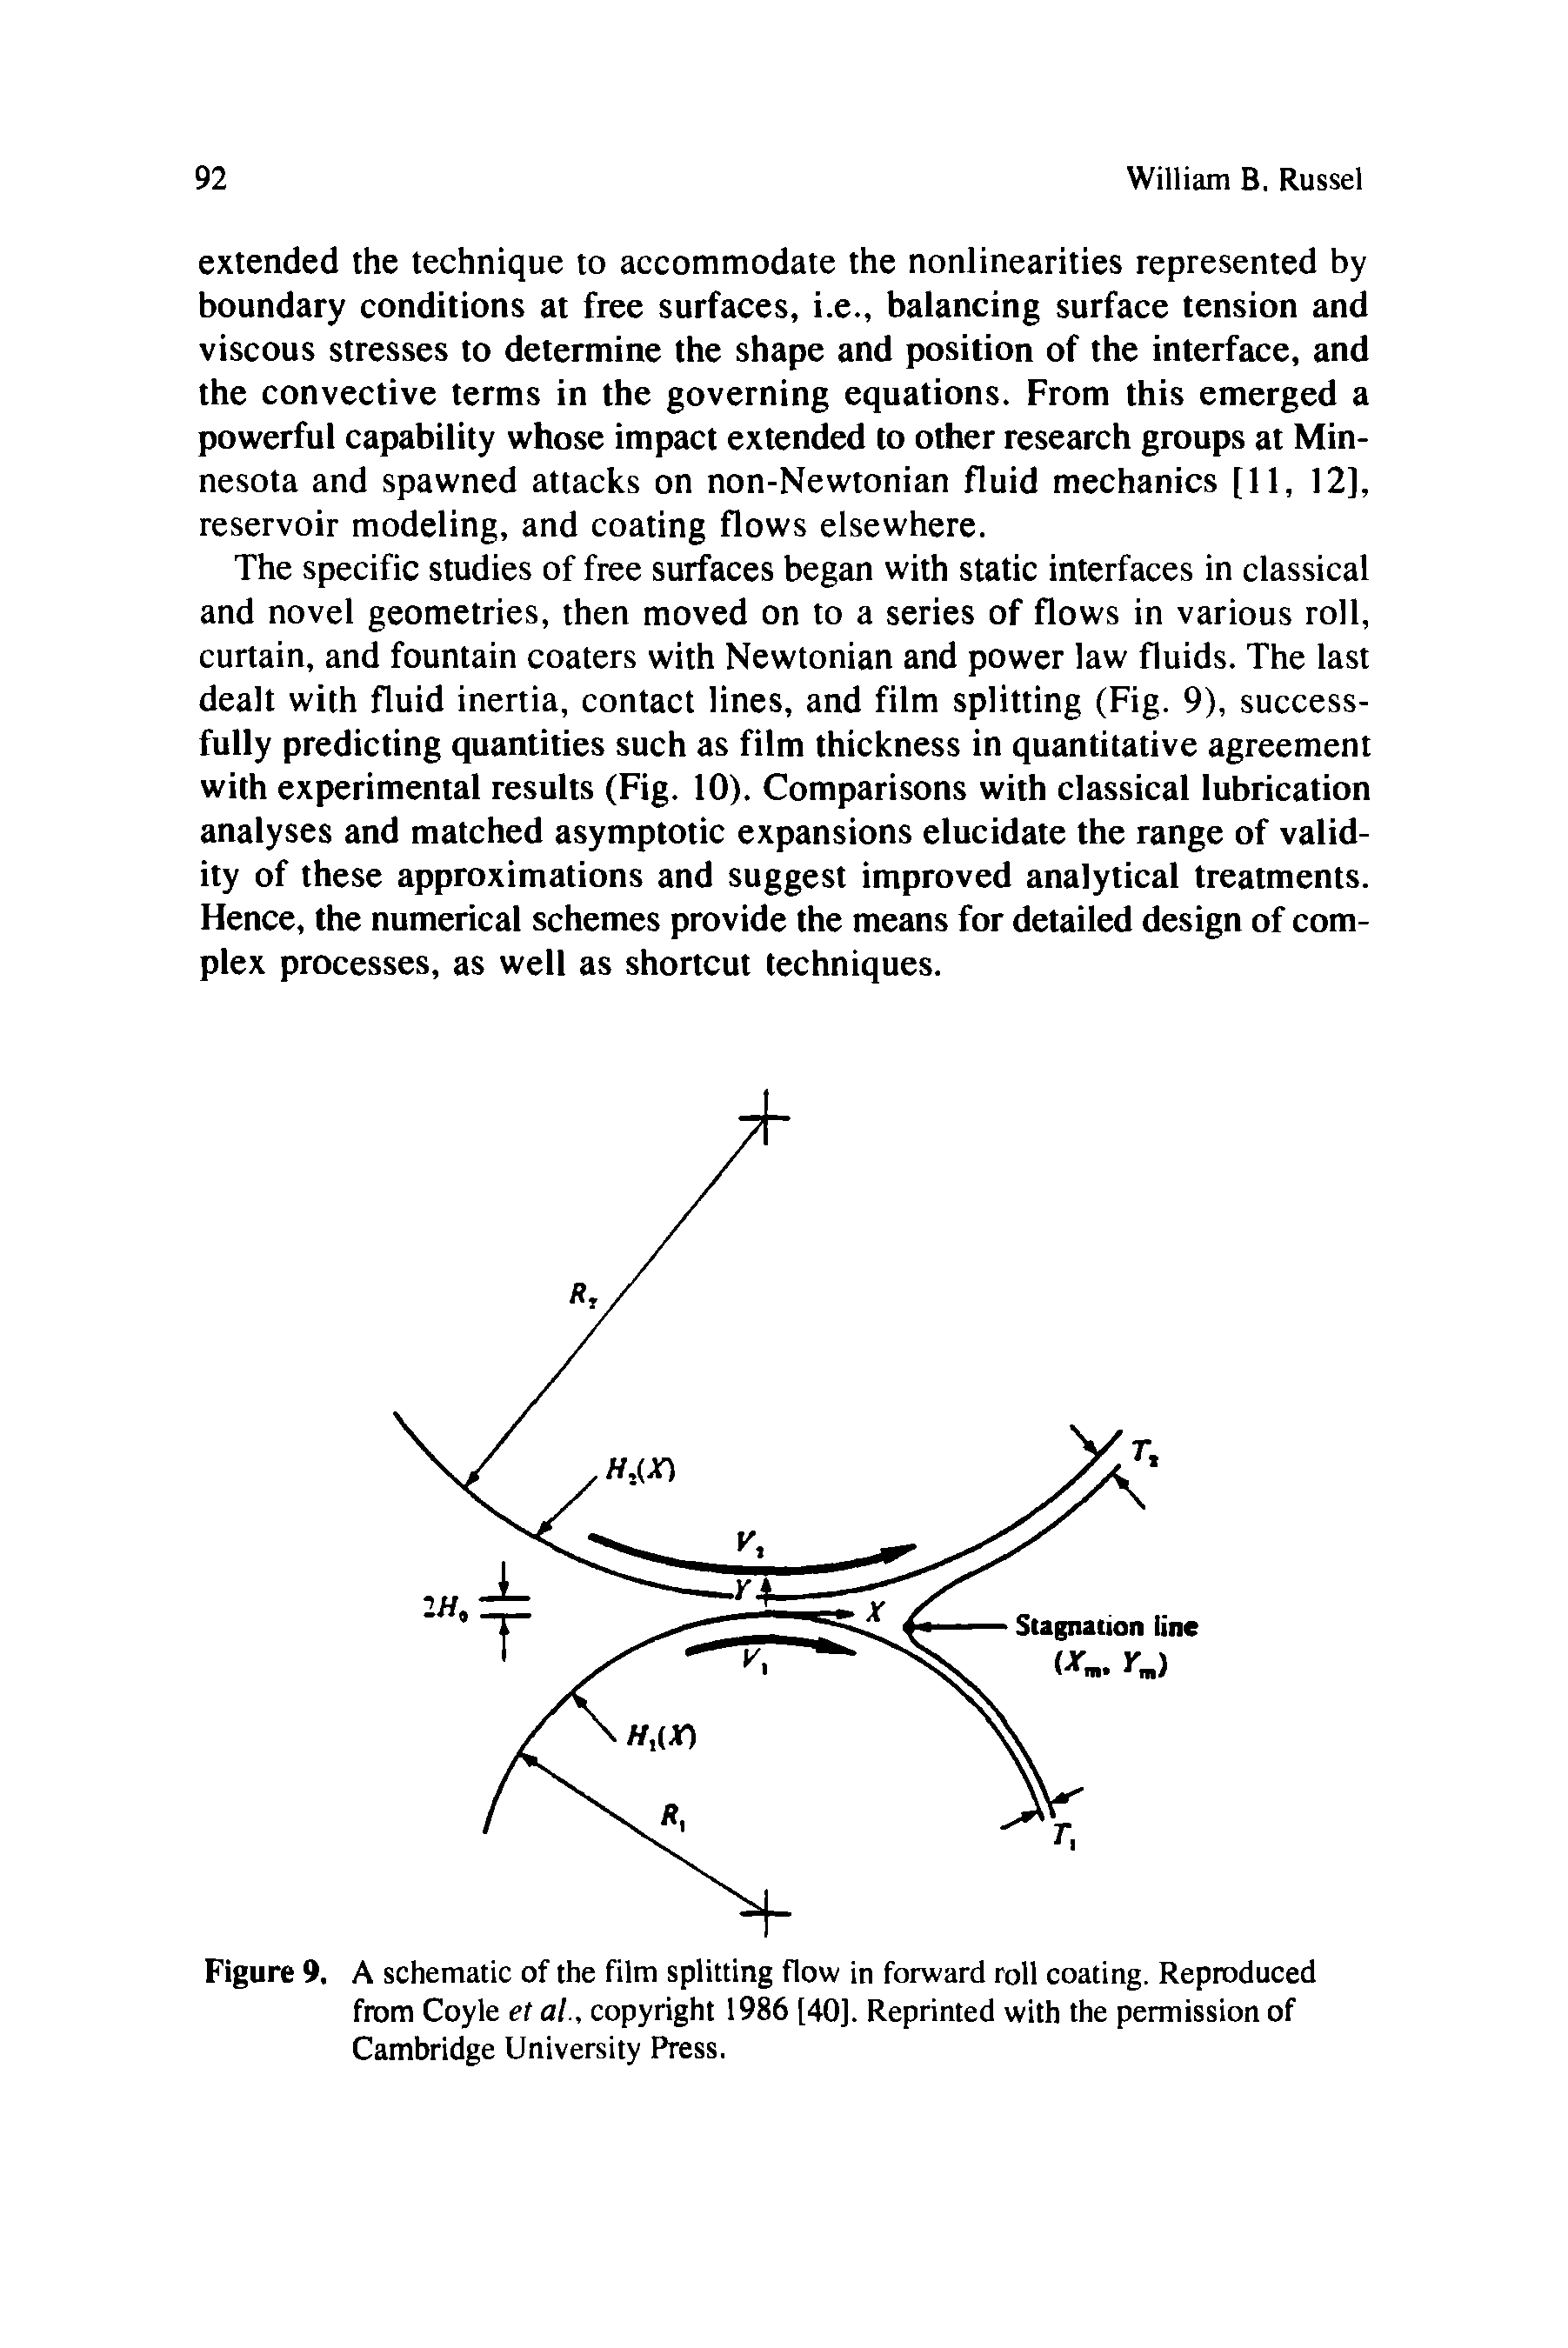 Figure 9, A schematic of the film splitting flow in forward roll coating. Reproduced from Coyle et ai, copyright 1986 [40]. Reprinted with the permission of Cambridge University Press.